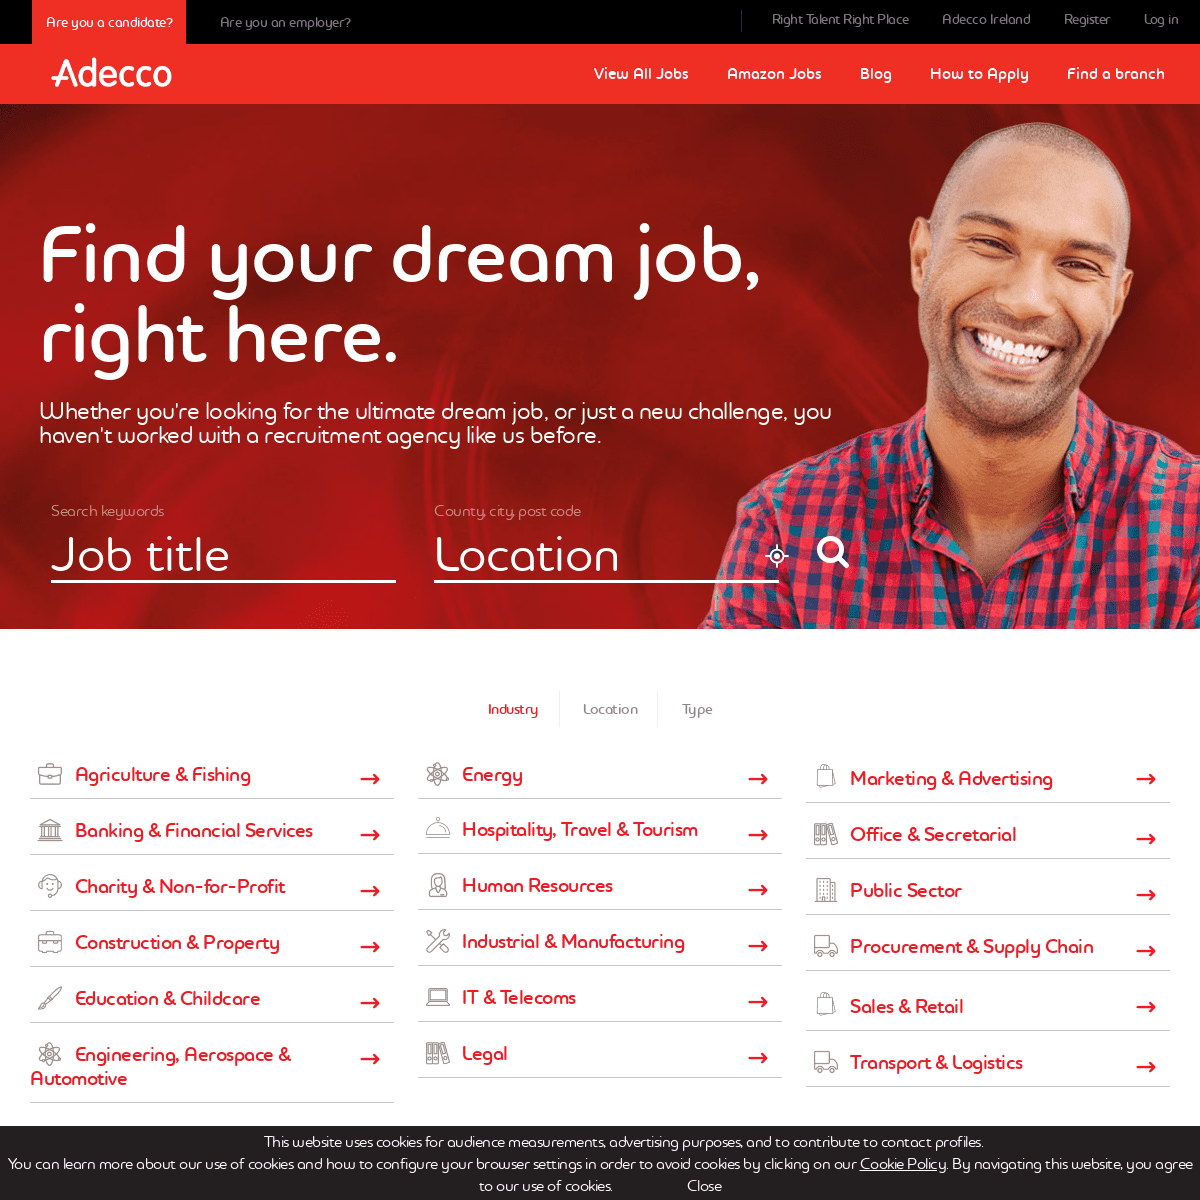 A complete backup of adecco.co.uk